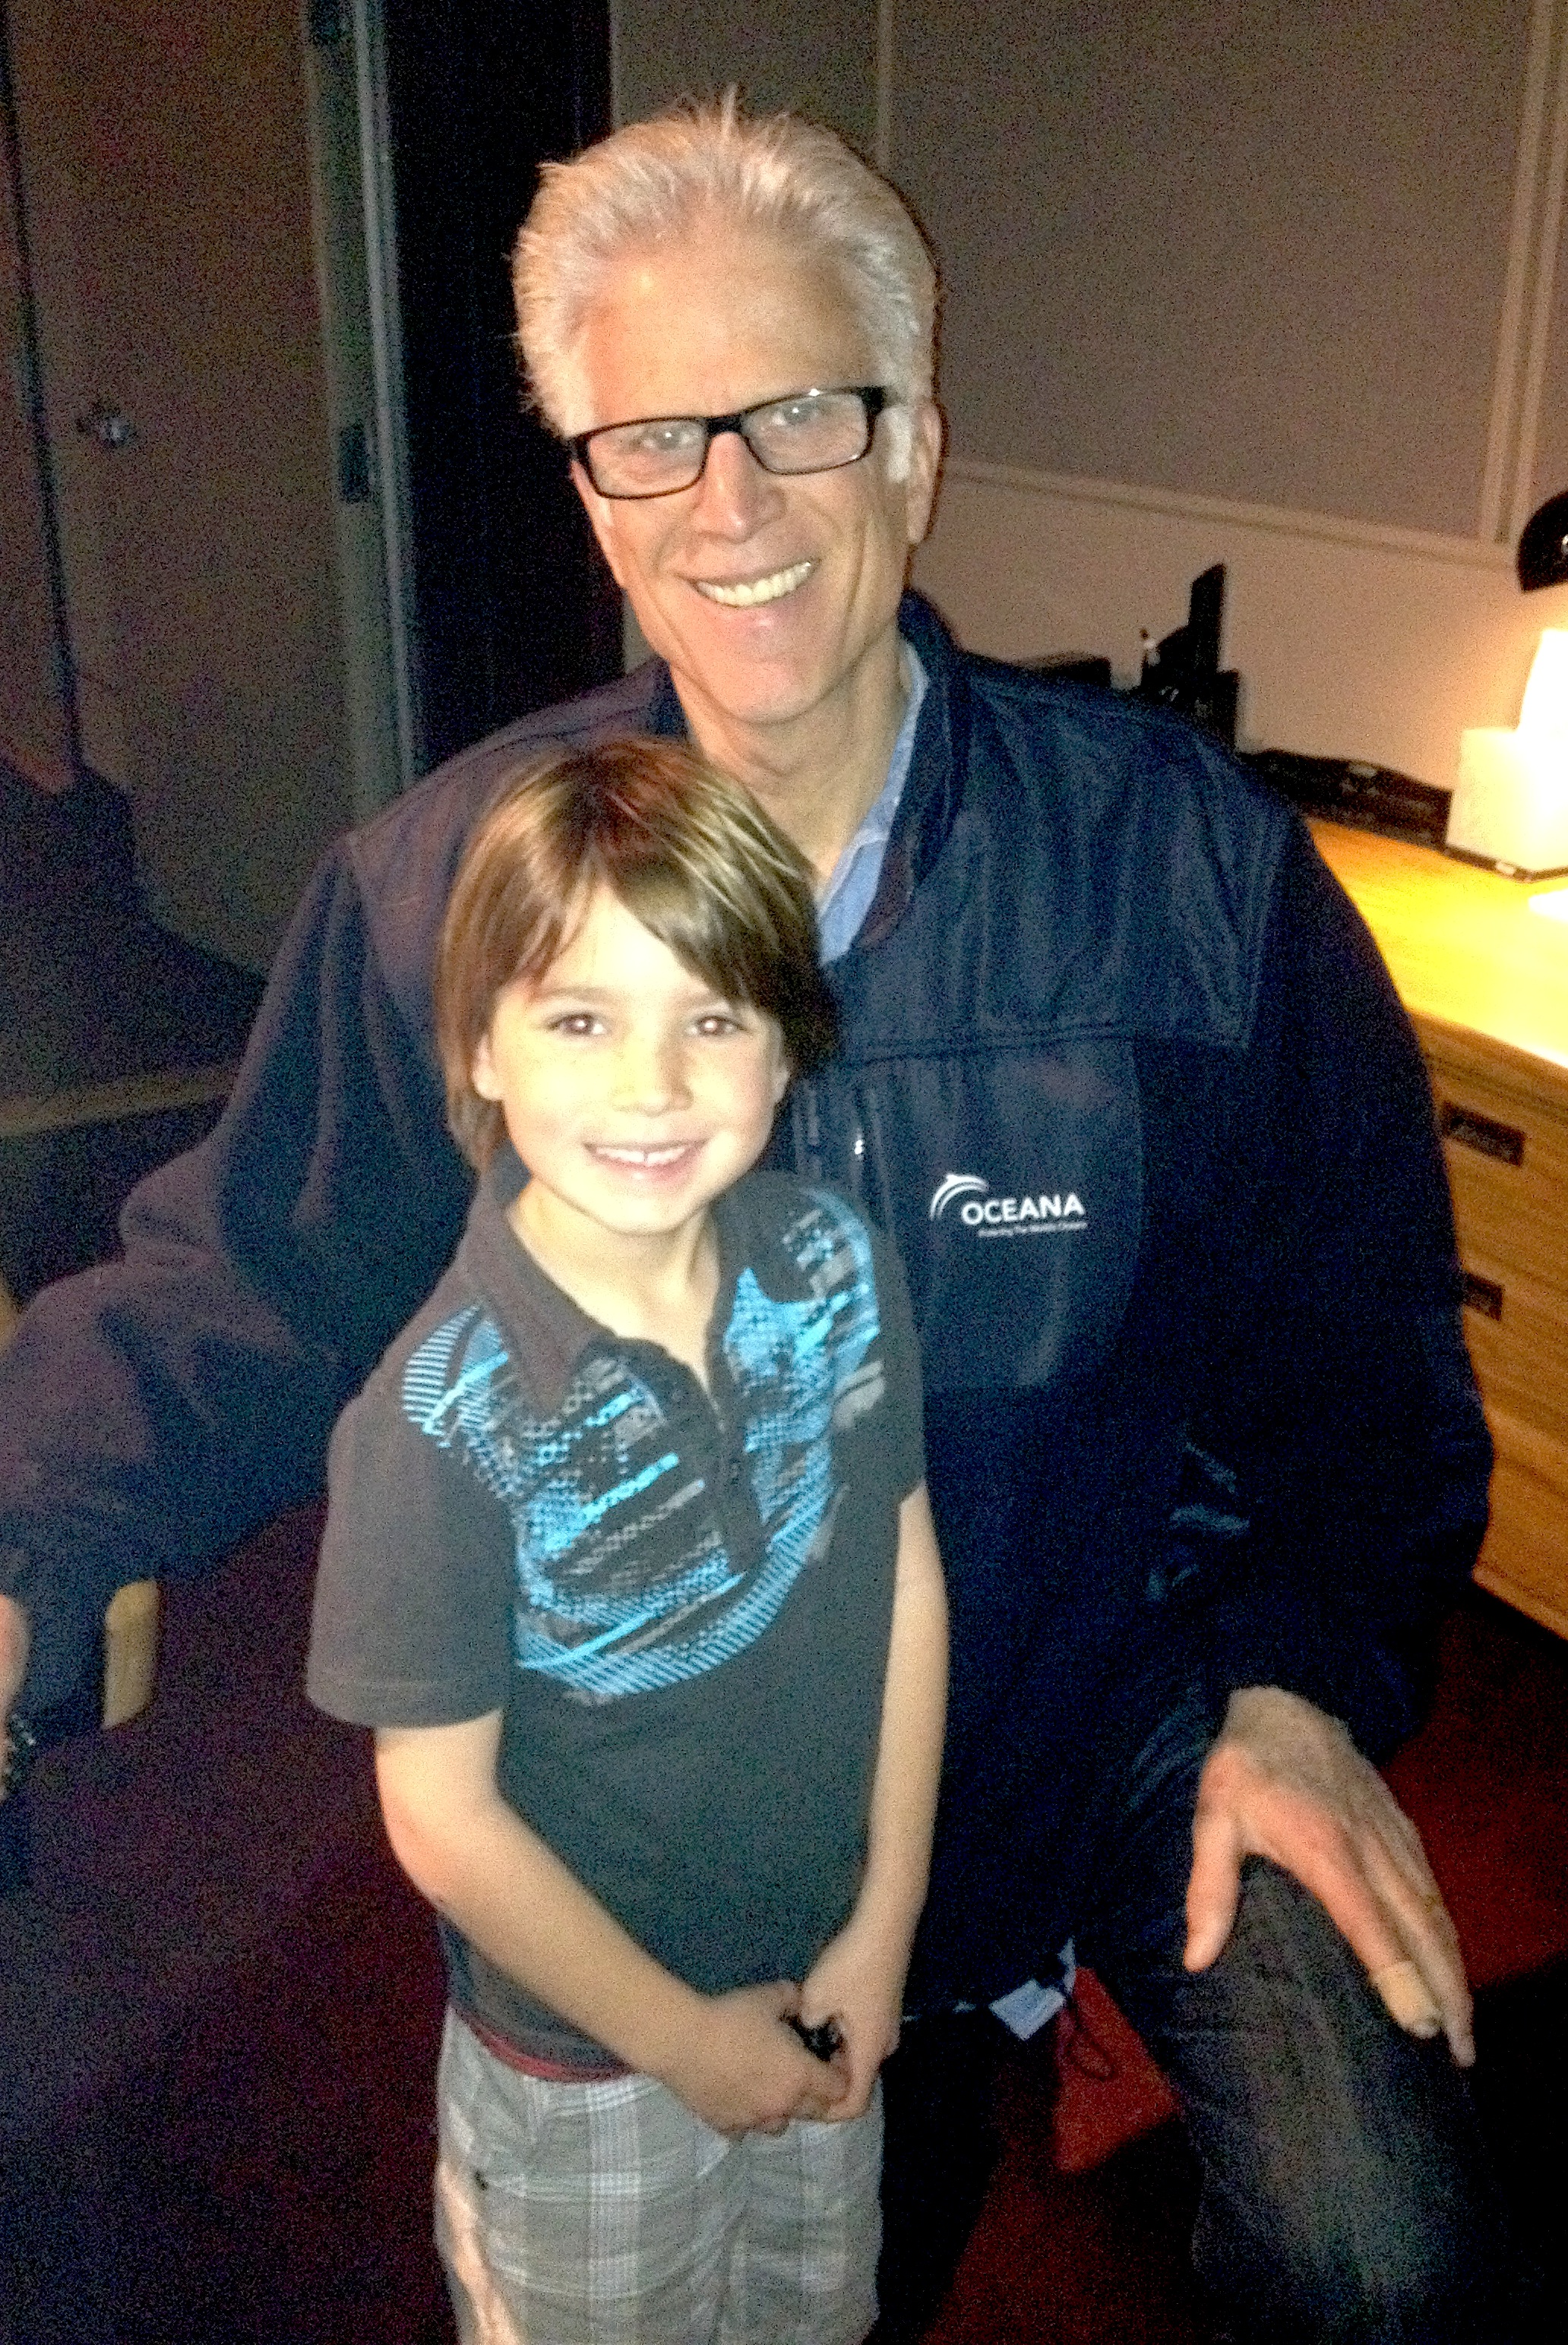 Aiden on the set of CSI with actor Ted Danson.